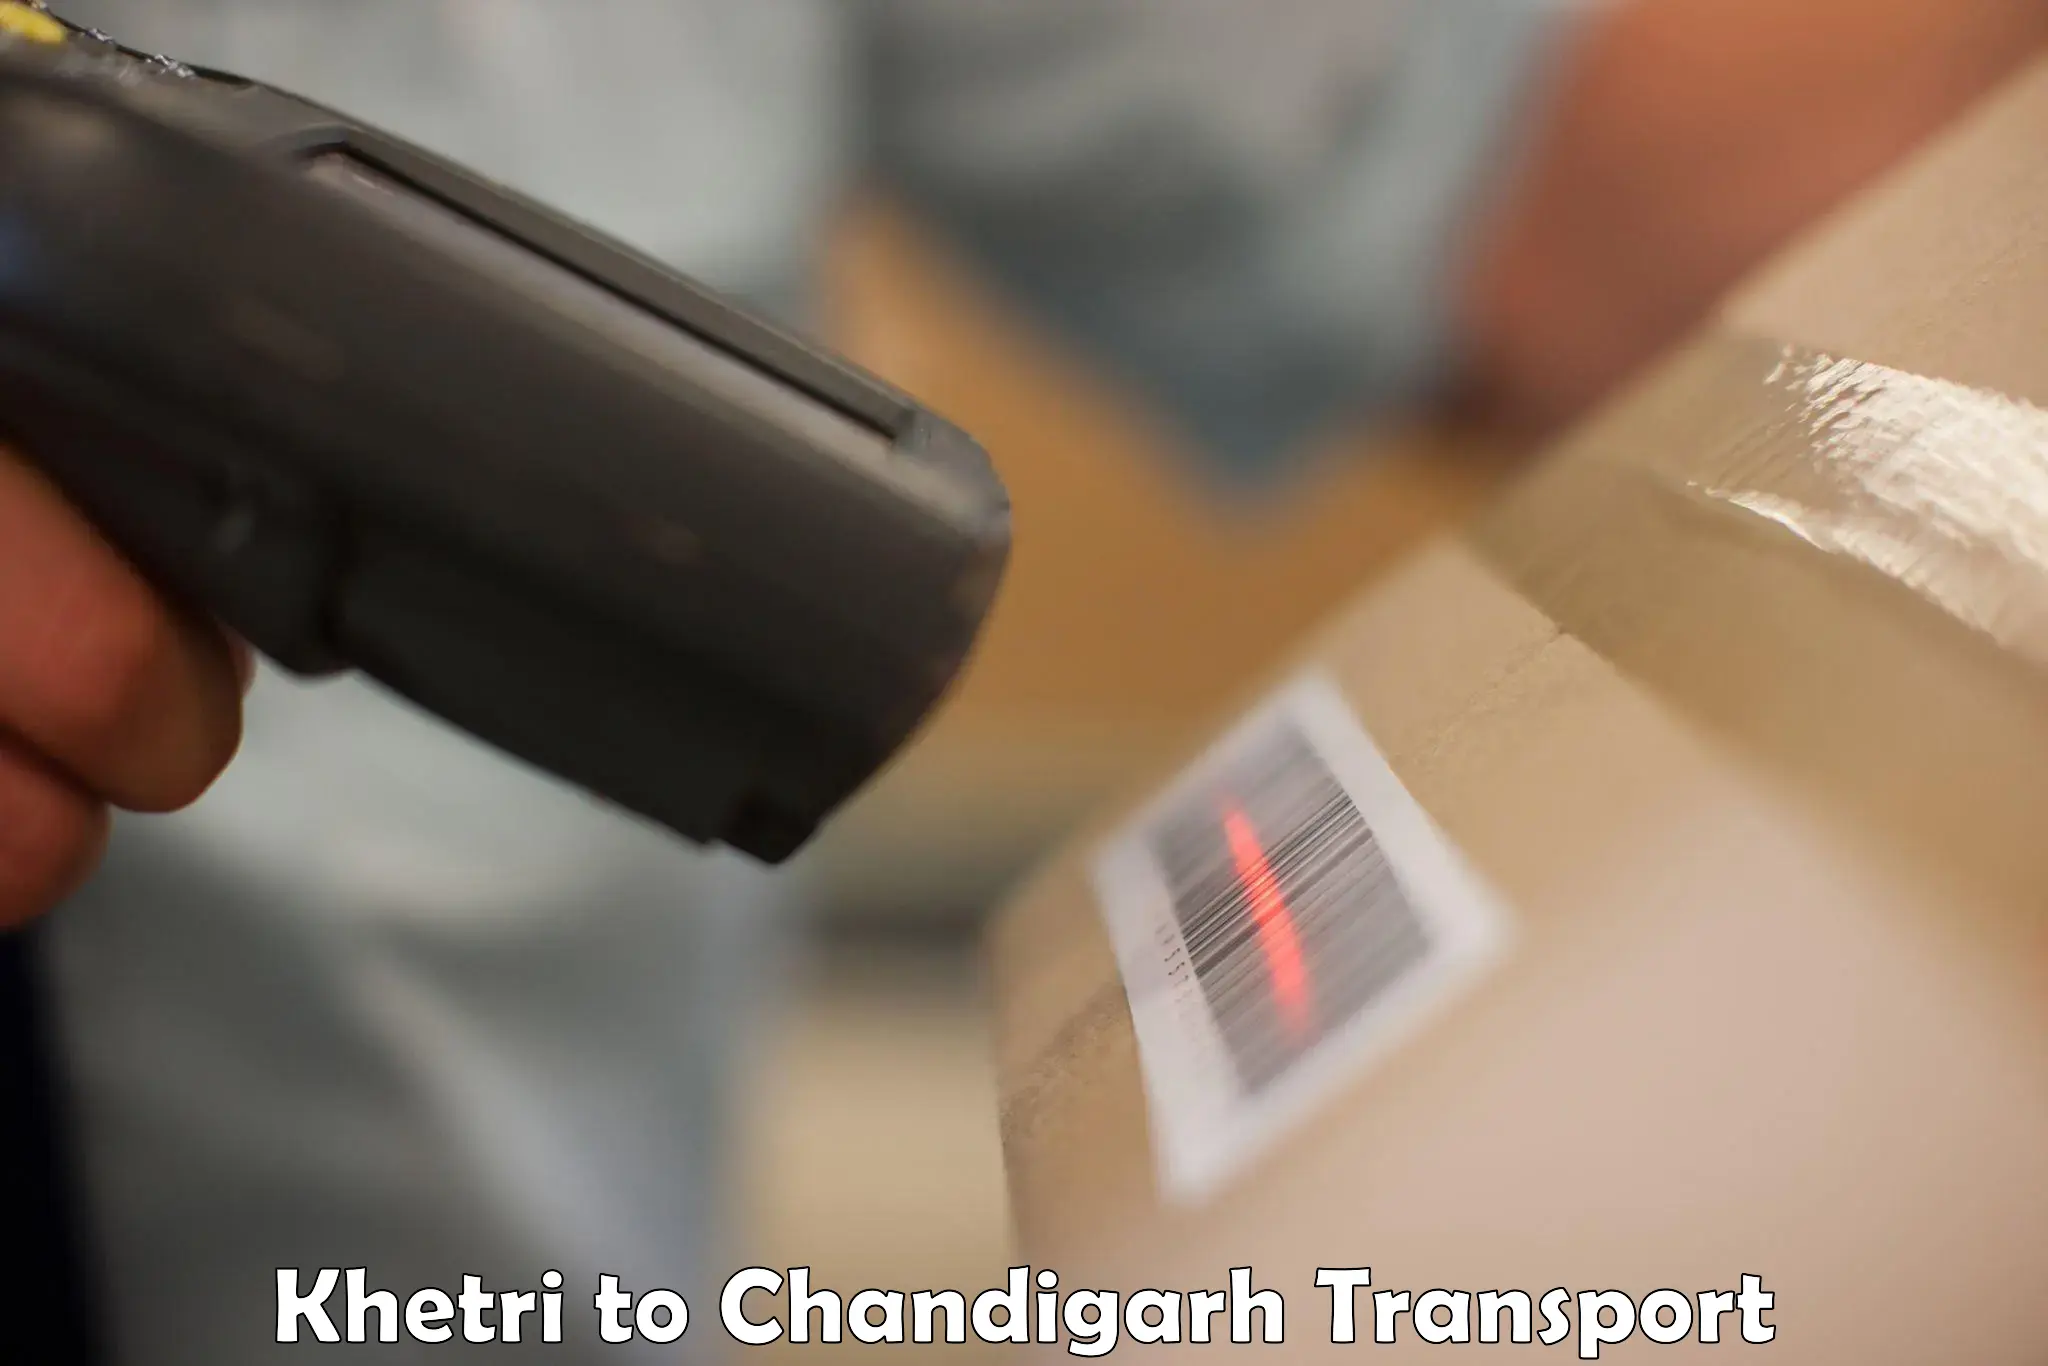 Truck transport companies in India in Khetri to Chandigarh